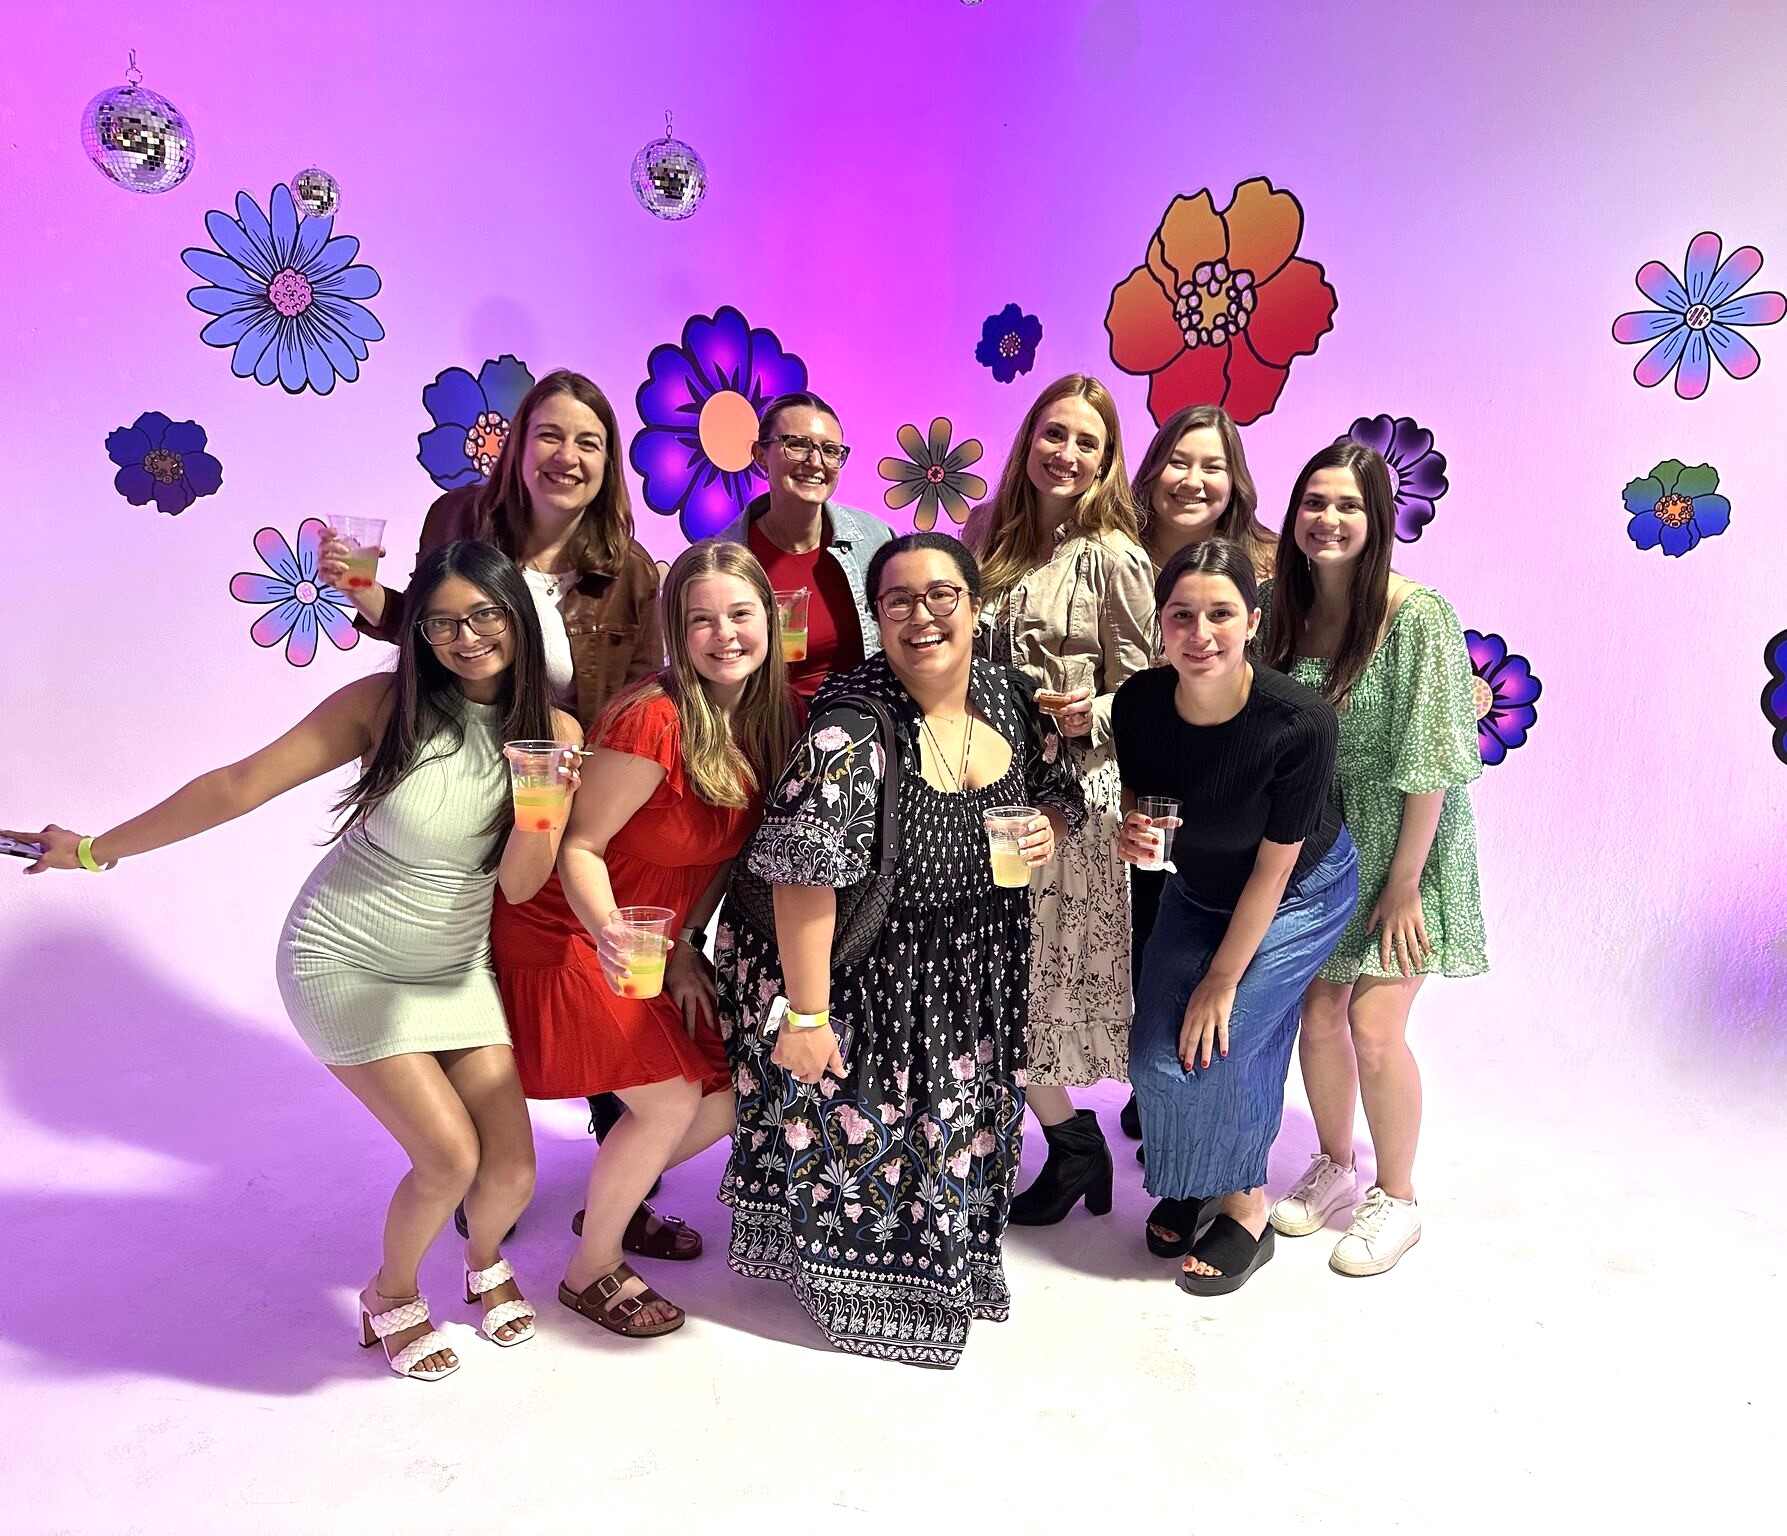 The Violet PR team attended Out Montclair’s Spring Fling fundraiser and was a proud sponsor of the community event.